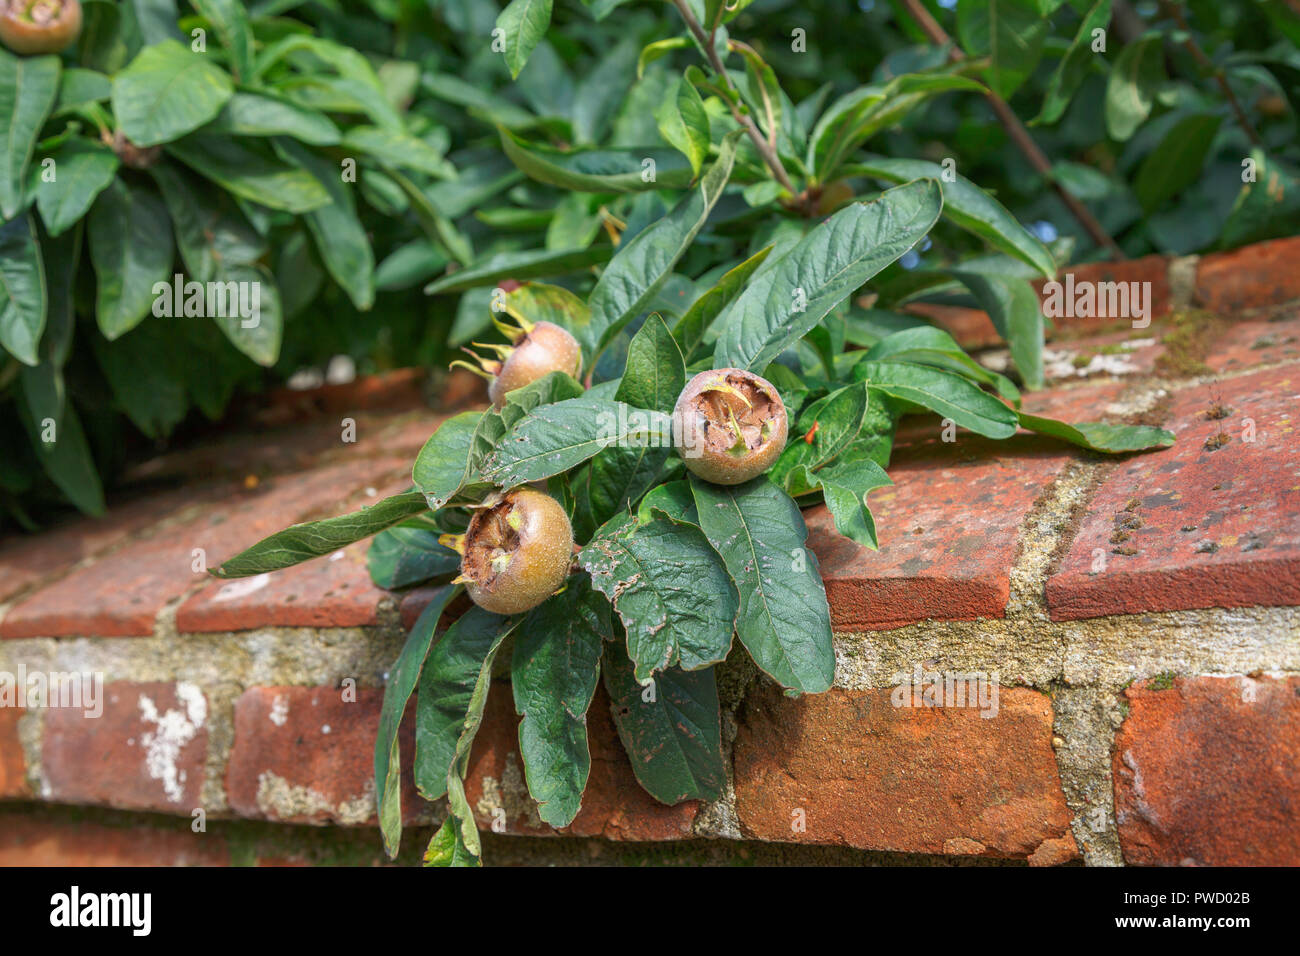 Foliage and edible fruit of Mespilus germanica, common medlar, growing over a red brick wall in autumn, Norwich, Norfolk, East Anglia, eastern England Stock Photo